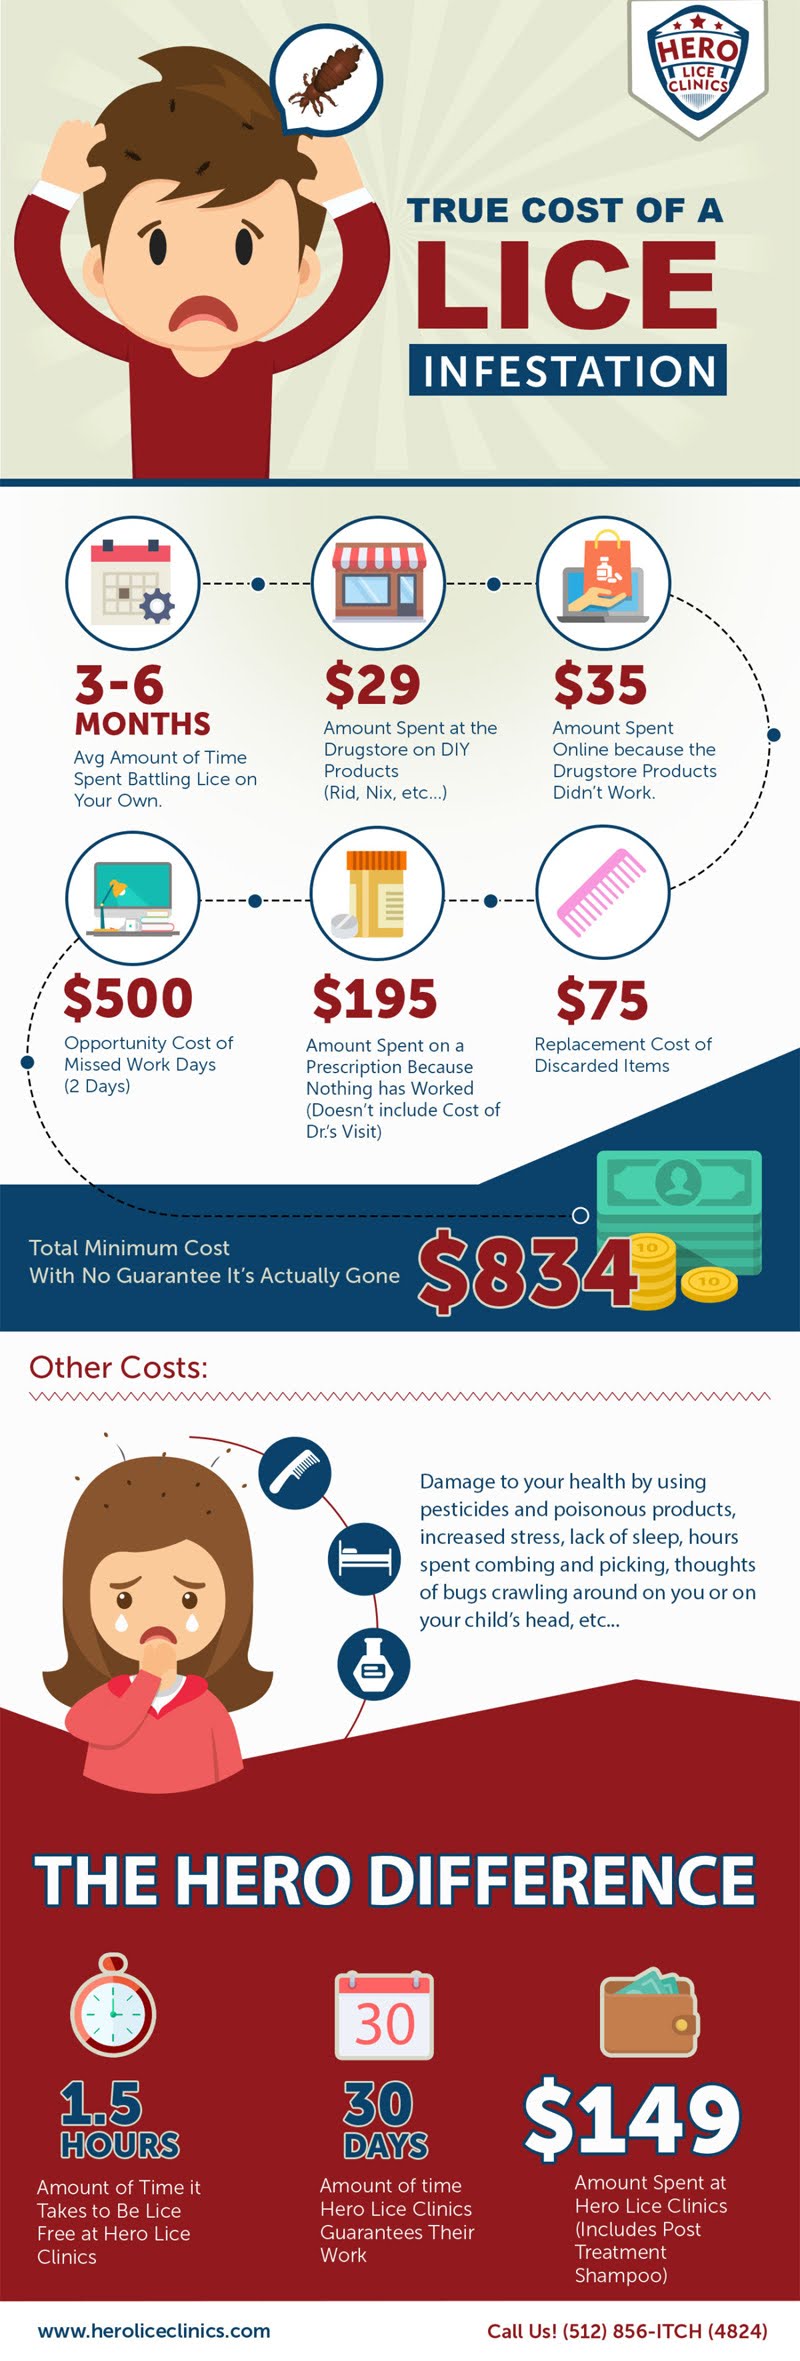 True Cost of Lice Infestation #infographic